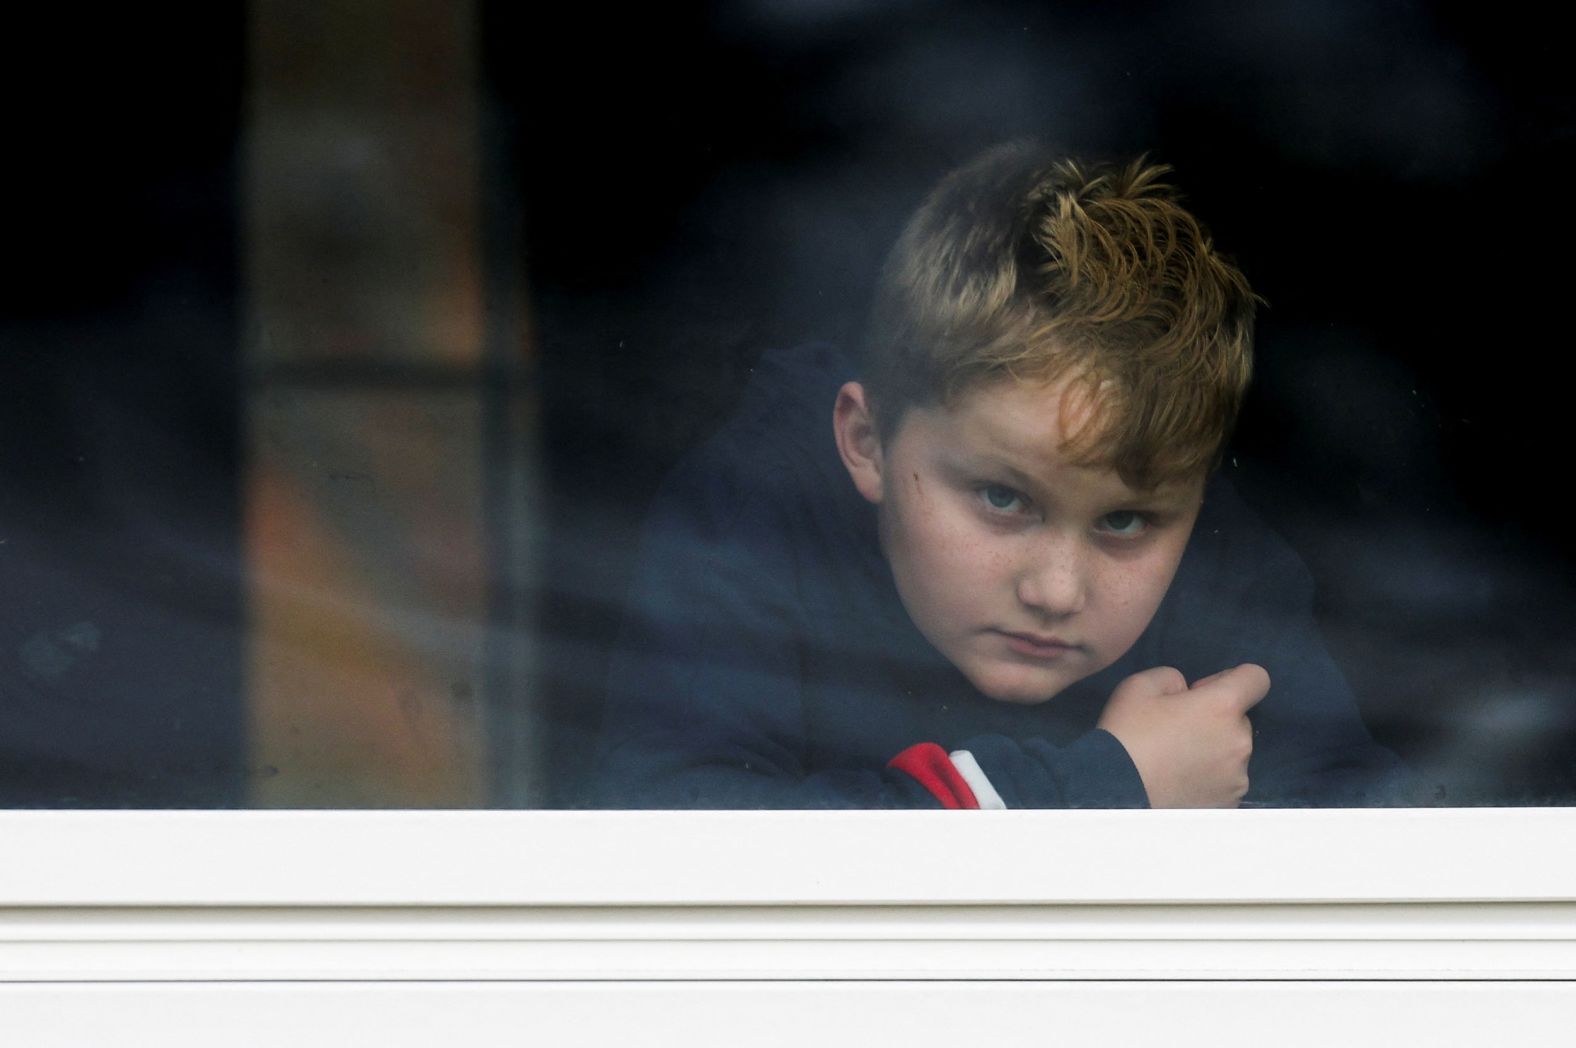 Dexter Britton, 9, looks out through a window in Lisbon Falls, Maine, on Thursday. The Lisbon area has been under a shelter in place order since Wednesday night.